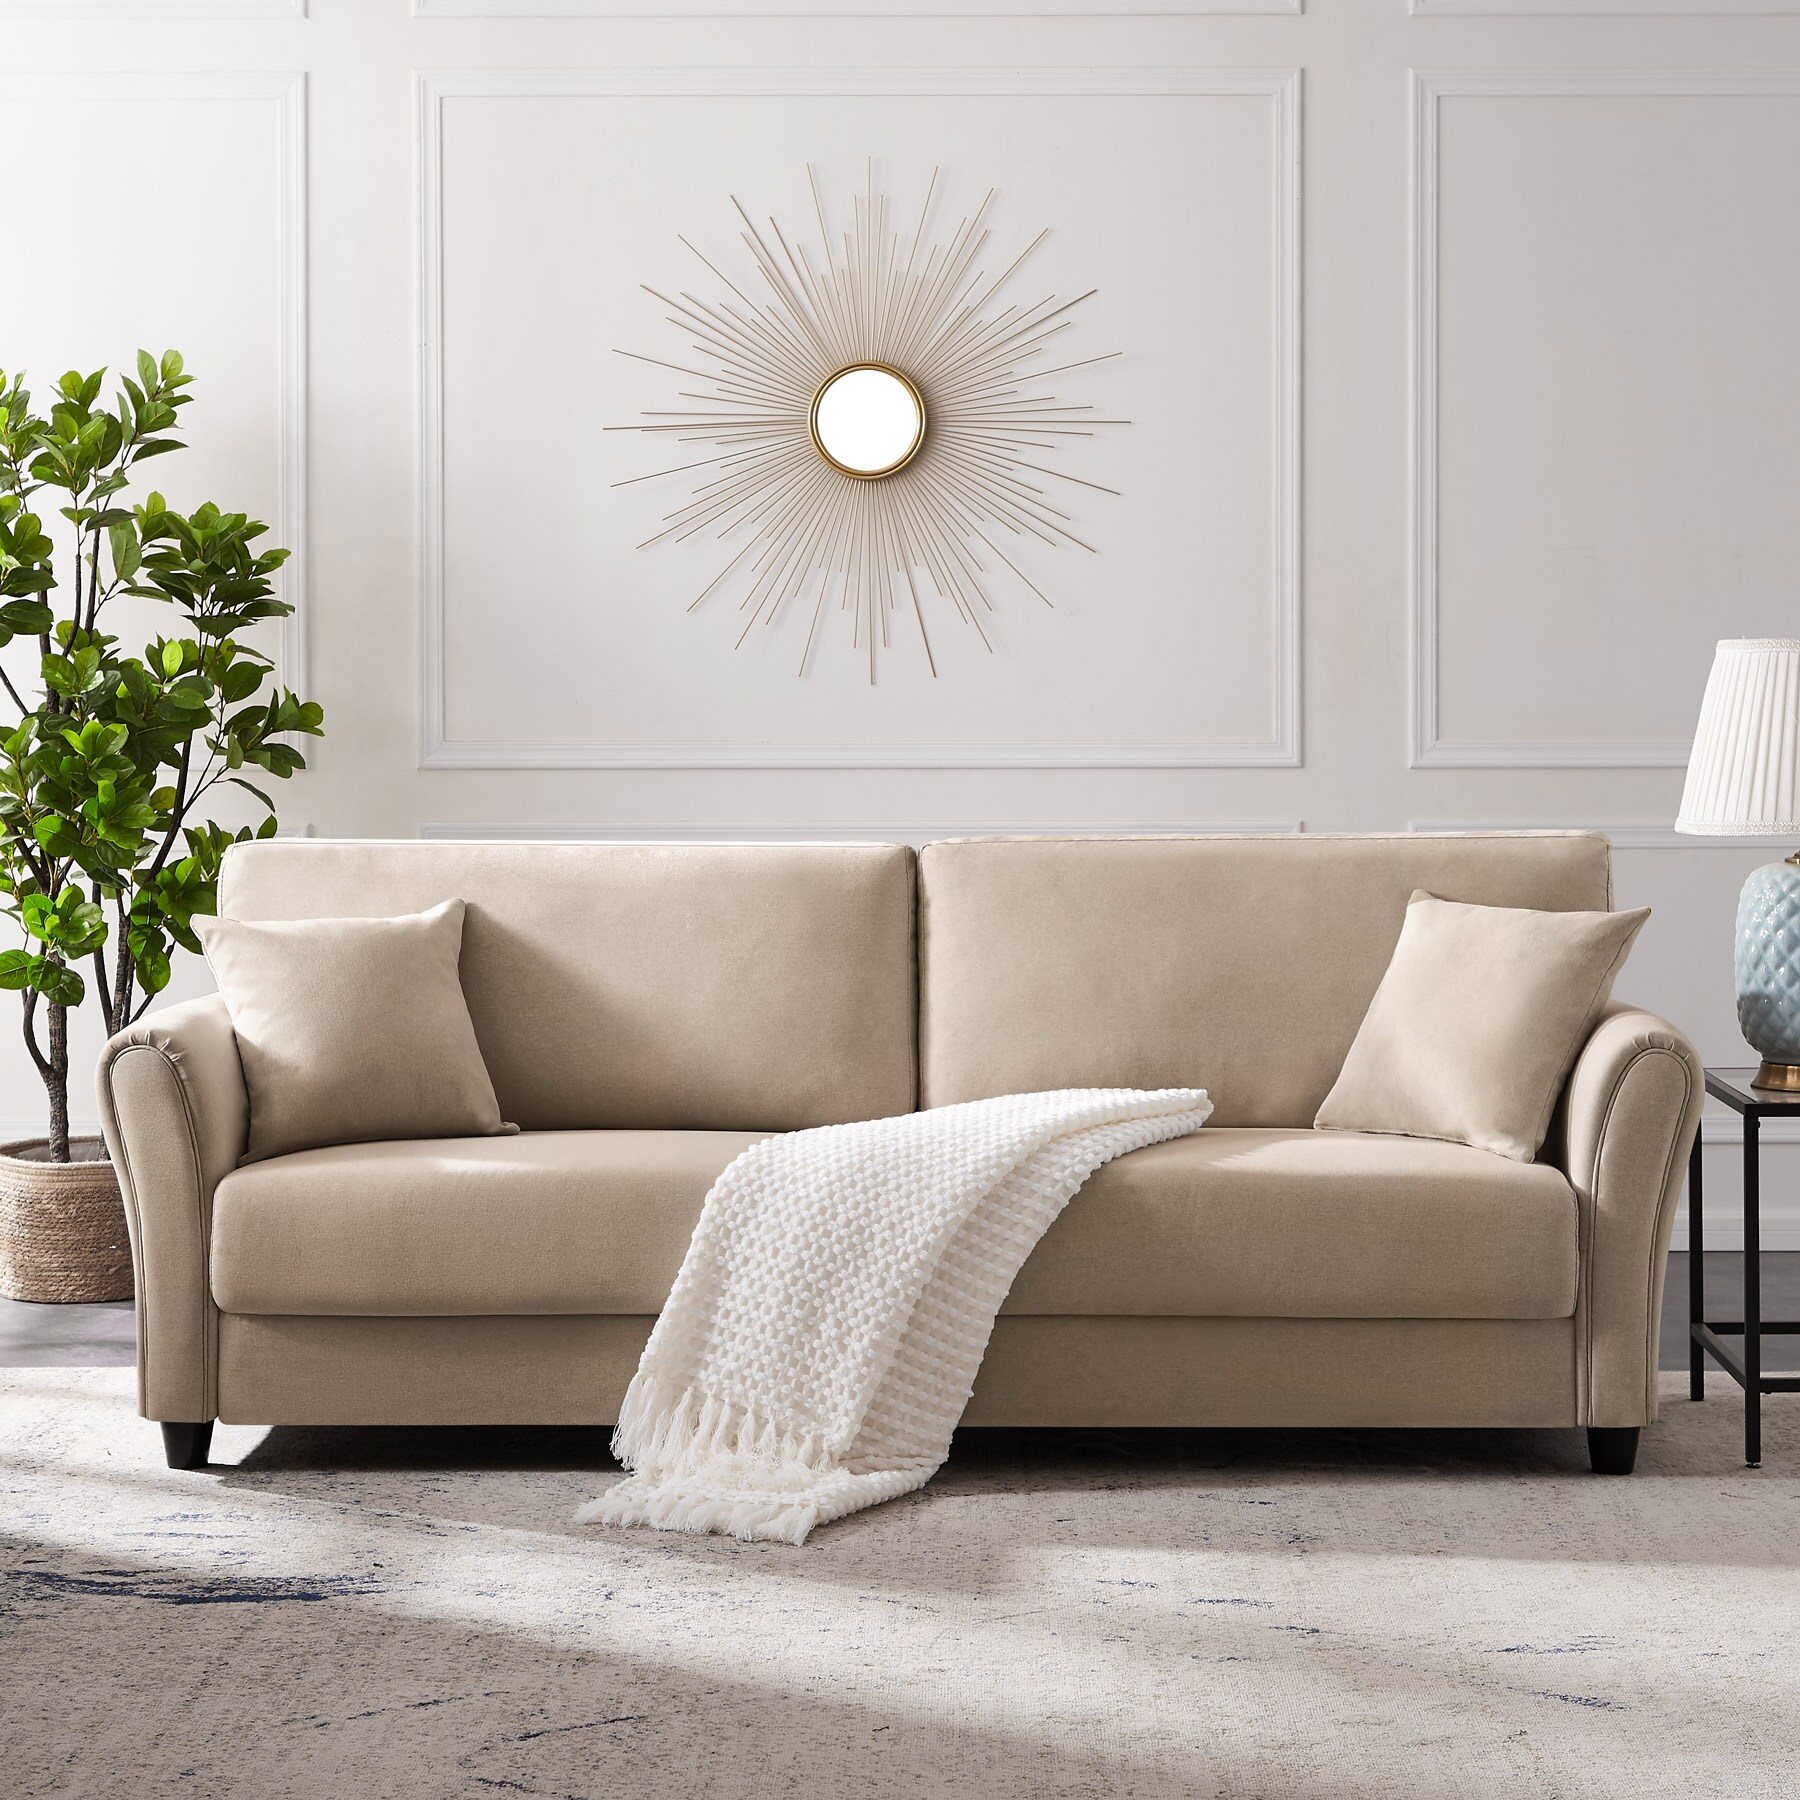 Linen Fabric Upholstered Sofa 3 Seater Removable Back Cushions Couch for  Living Room with Throw Pillows and Square Arms - Bed Bath & Beyond -  38427900